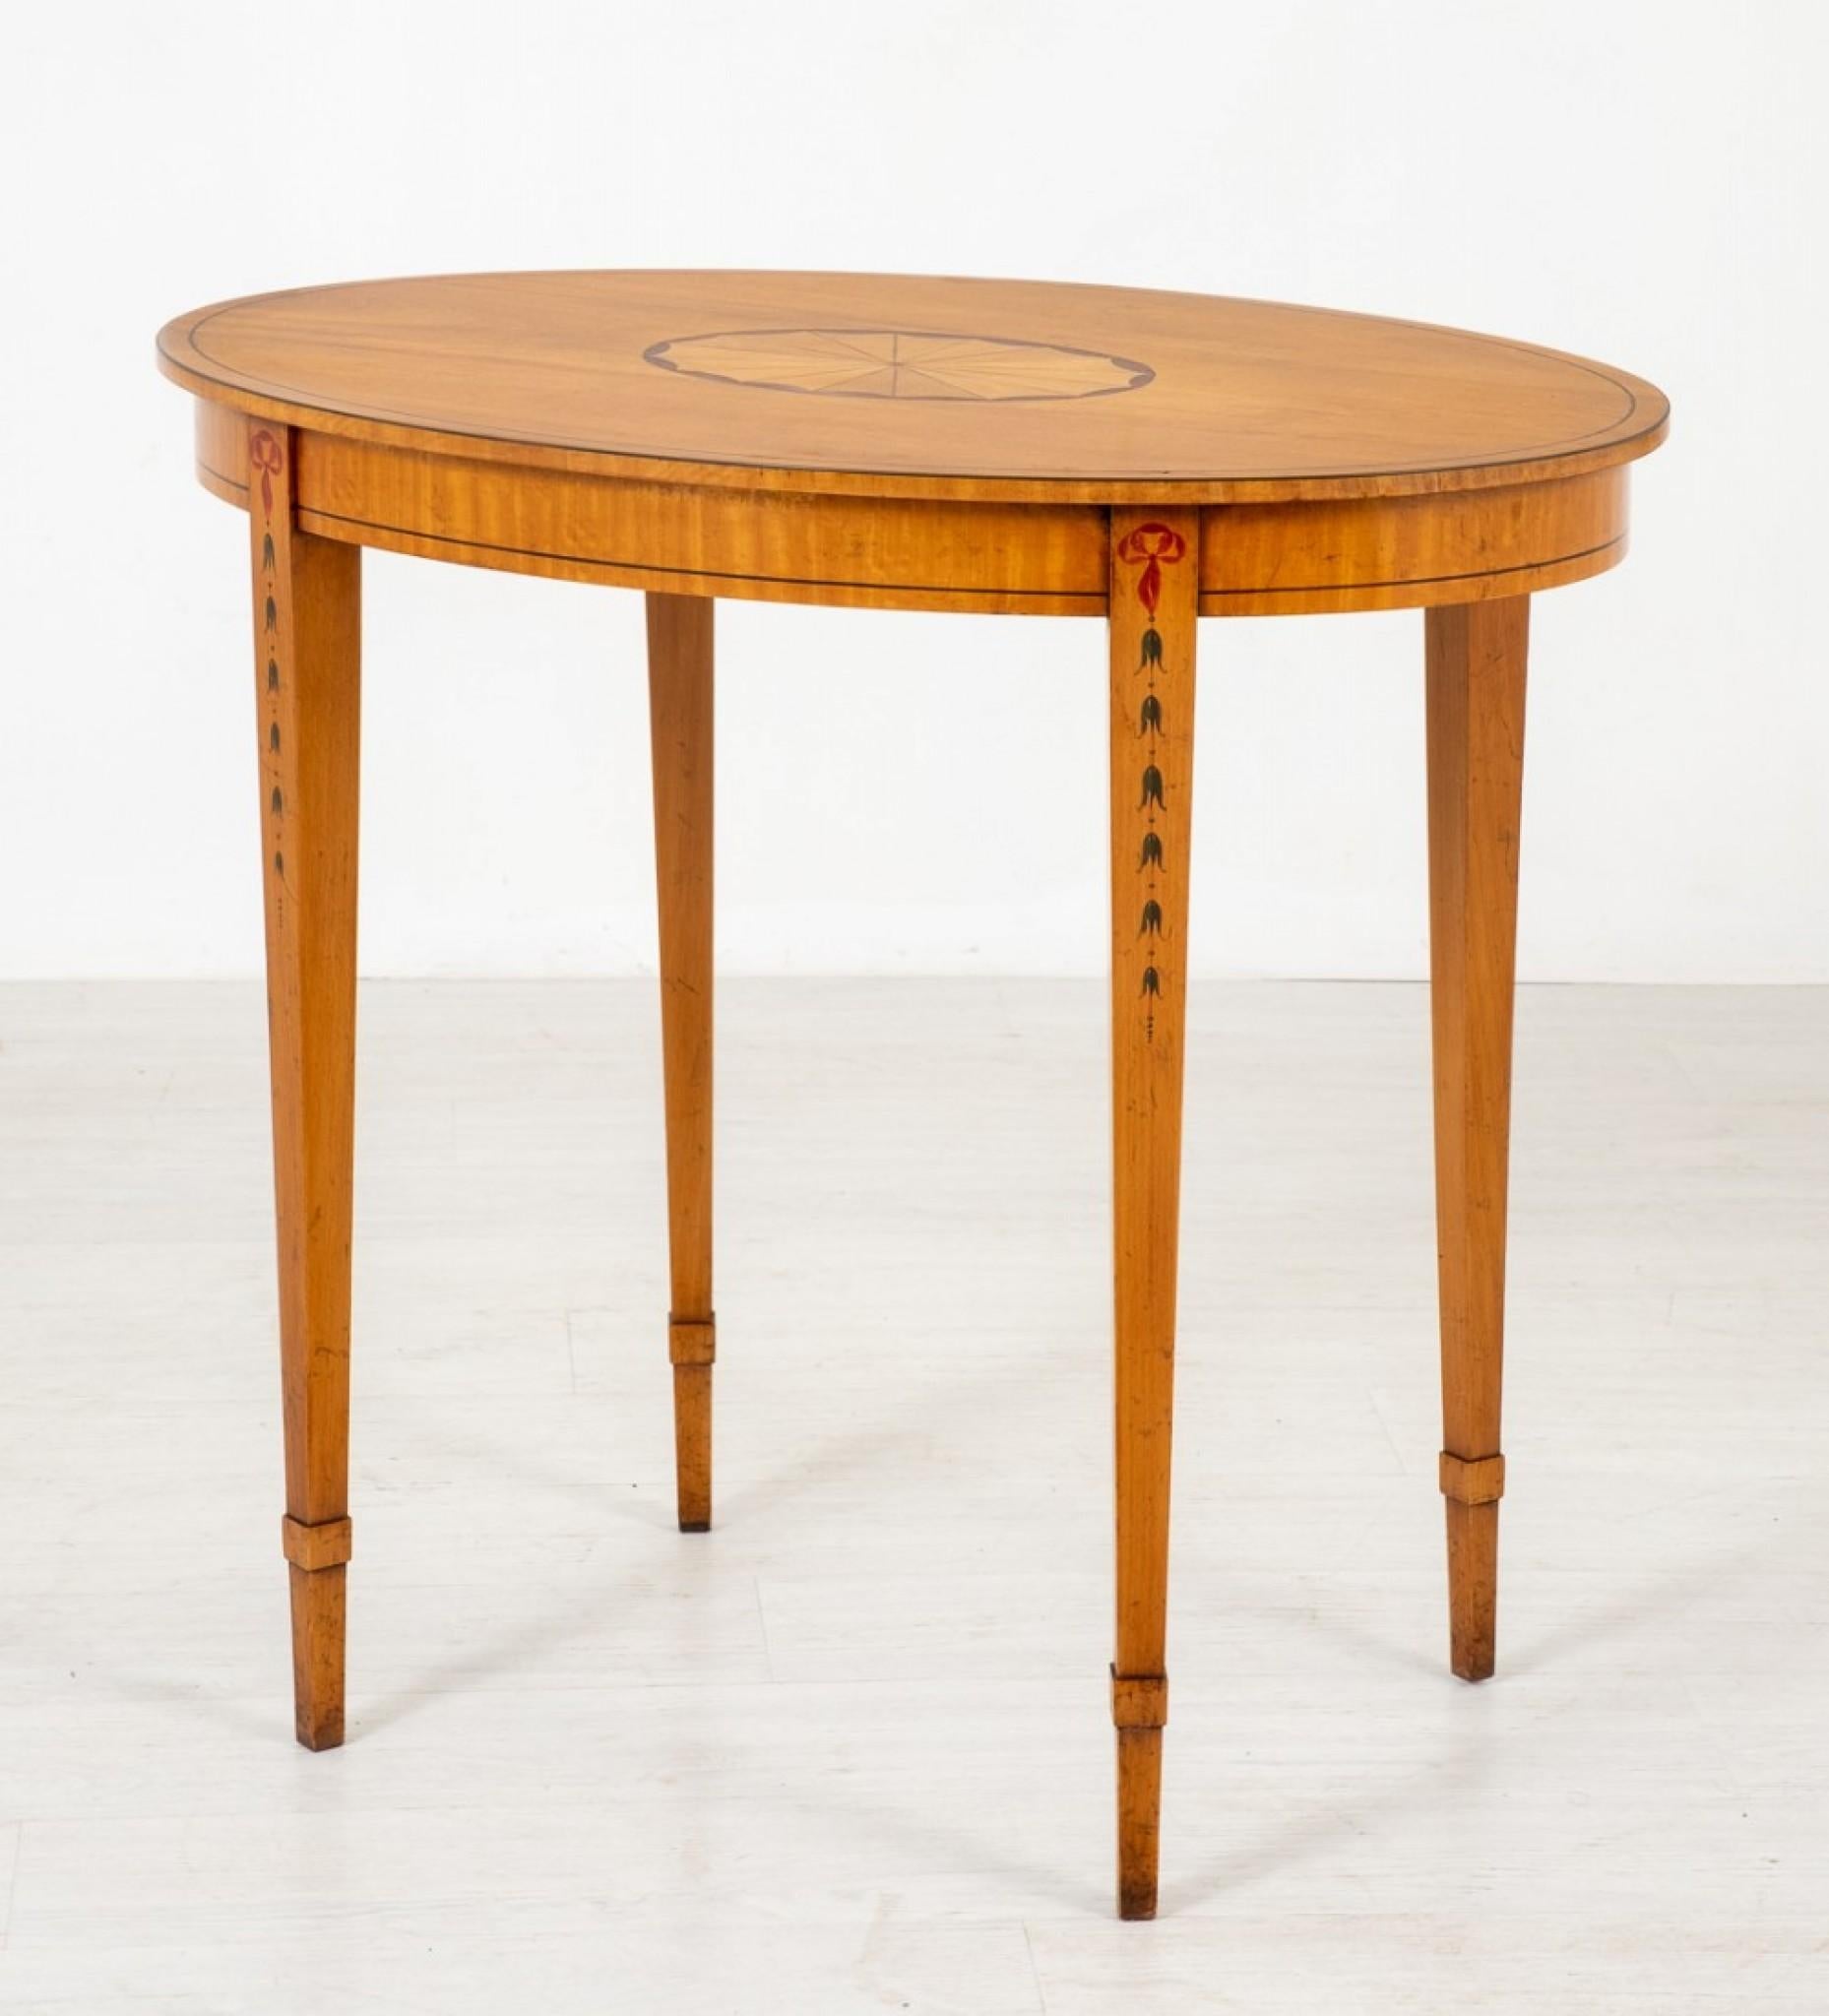 Hepplewhite style satinwood occasional table.
circa 1890.
This elegant table is raised upon tapered legs with painted harebell decoration.
The satinwood frieze having ebony line inlays .
The top of the table featuring a centralised inlaid